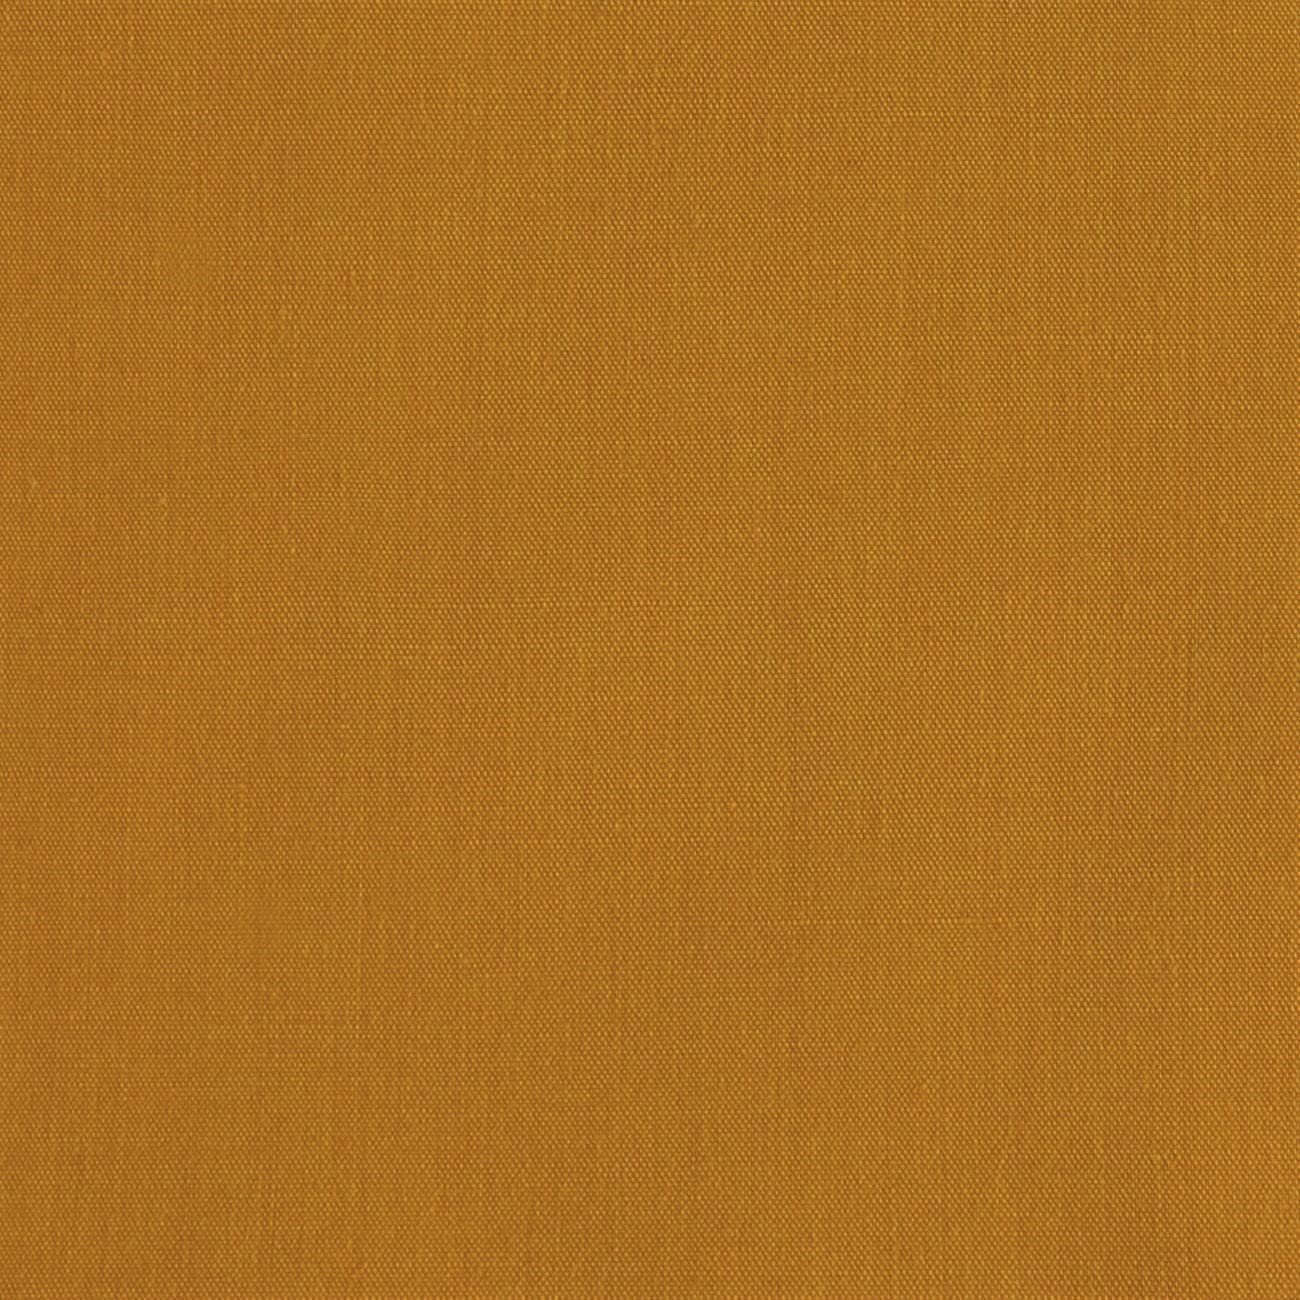 Premium Light Weight Poly Cotton Blend Broadcloth Fabric, Good to Make Face Mask Fabric (Mustard Den, 1 Yard)